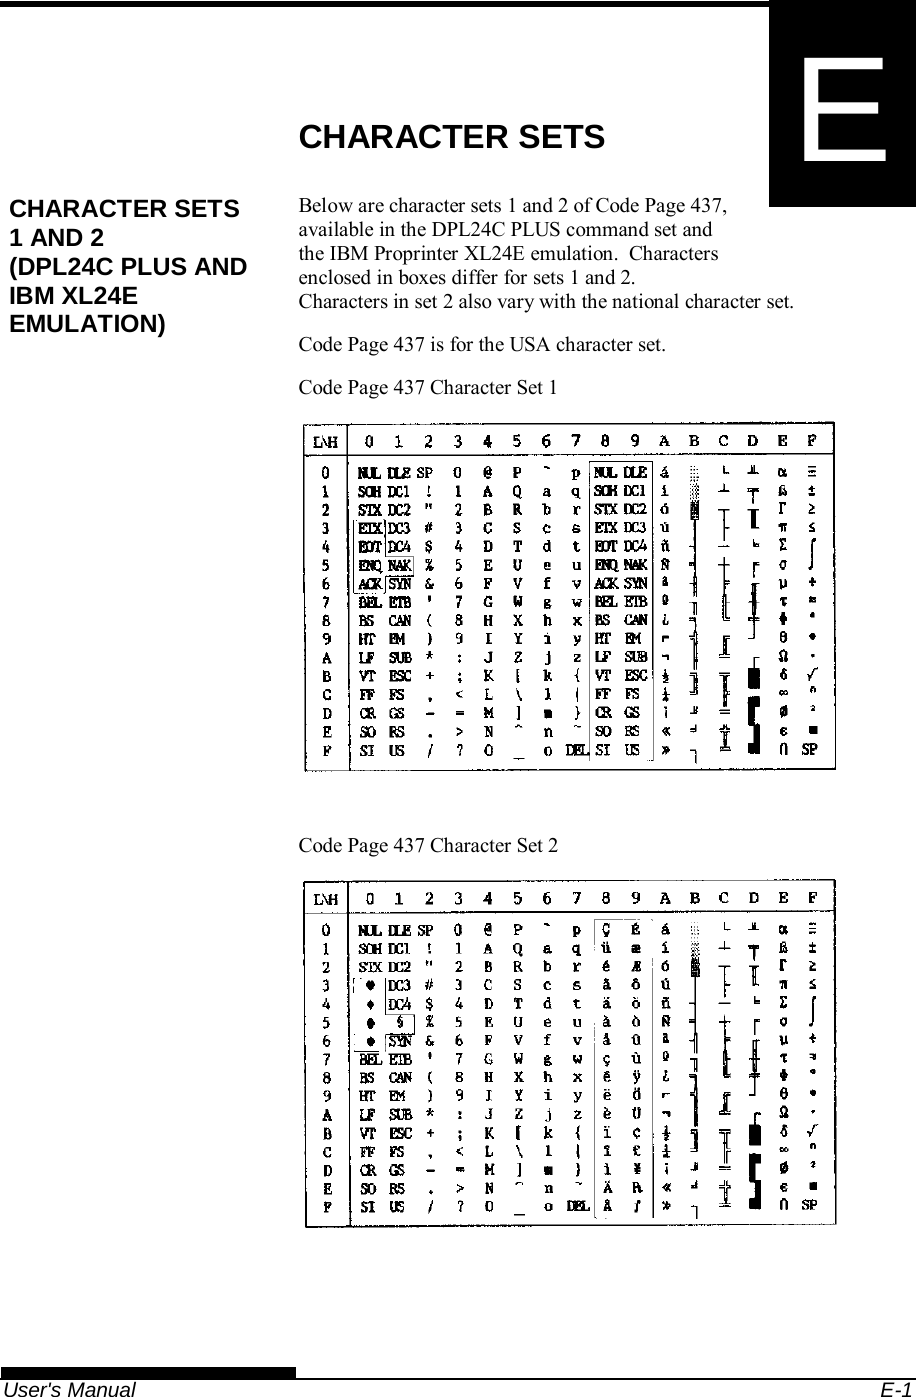   User&apos;s Manual  E-1 E  APPENDIX E  CHARACTER SETS CHARACTER SETS Below are character sets 1 and 2 of Code Page 437, available in the DPL24C PLUS command set and the IBM Proprinter XL24E emulation.  Characters enclosed in boxes differ for sets 1 and 2. Characters in set 2 also vary with the national character set. Code Page 437 is for the USA character set. Code Page 437 Character Set 1   Code Page 437 Character Set 2  CHARACTER SETS 1 AND 2 (DPL24C PLUS AND IBM XL24E EMULATION) 